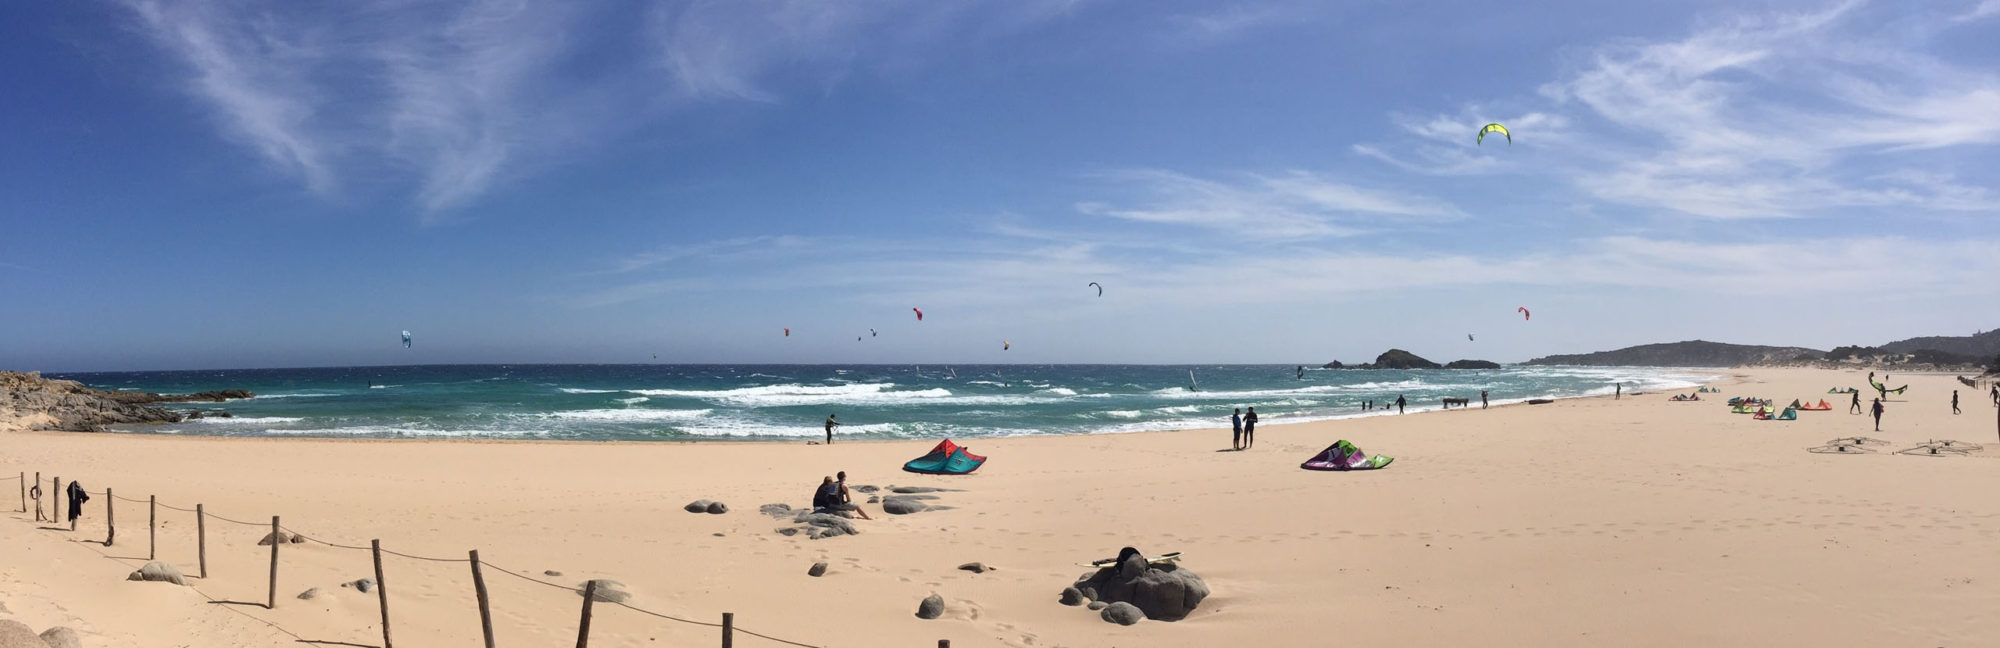 Kitesurfing Chia, Sardinia. Chia is a Wave Kite Spot in the Southern Sardinia, suitable just for advanced riders